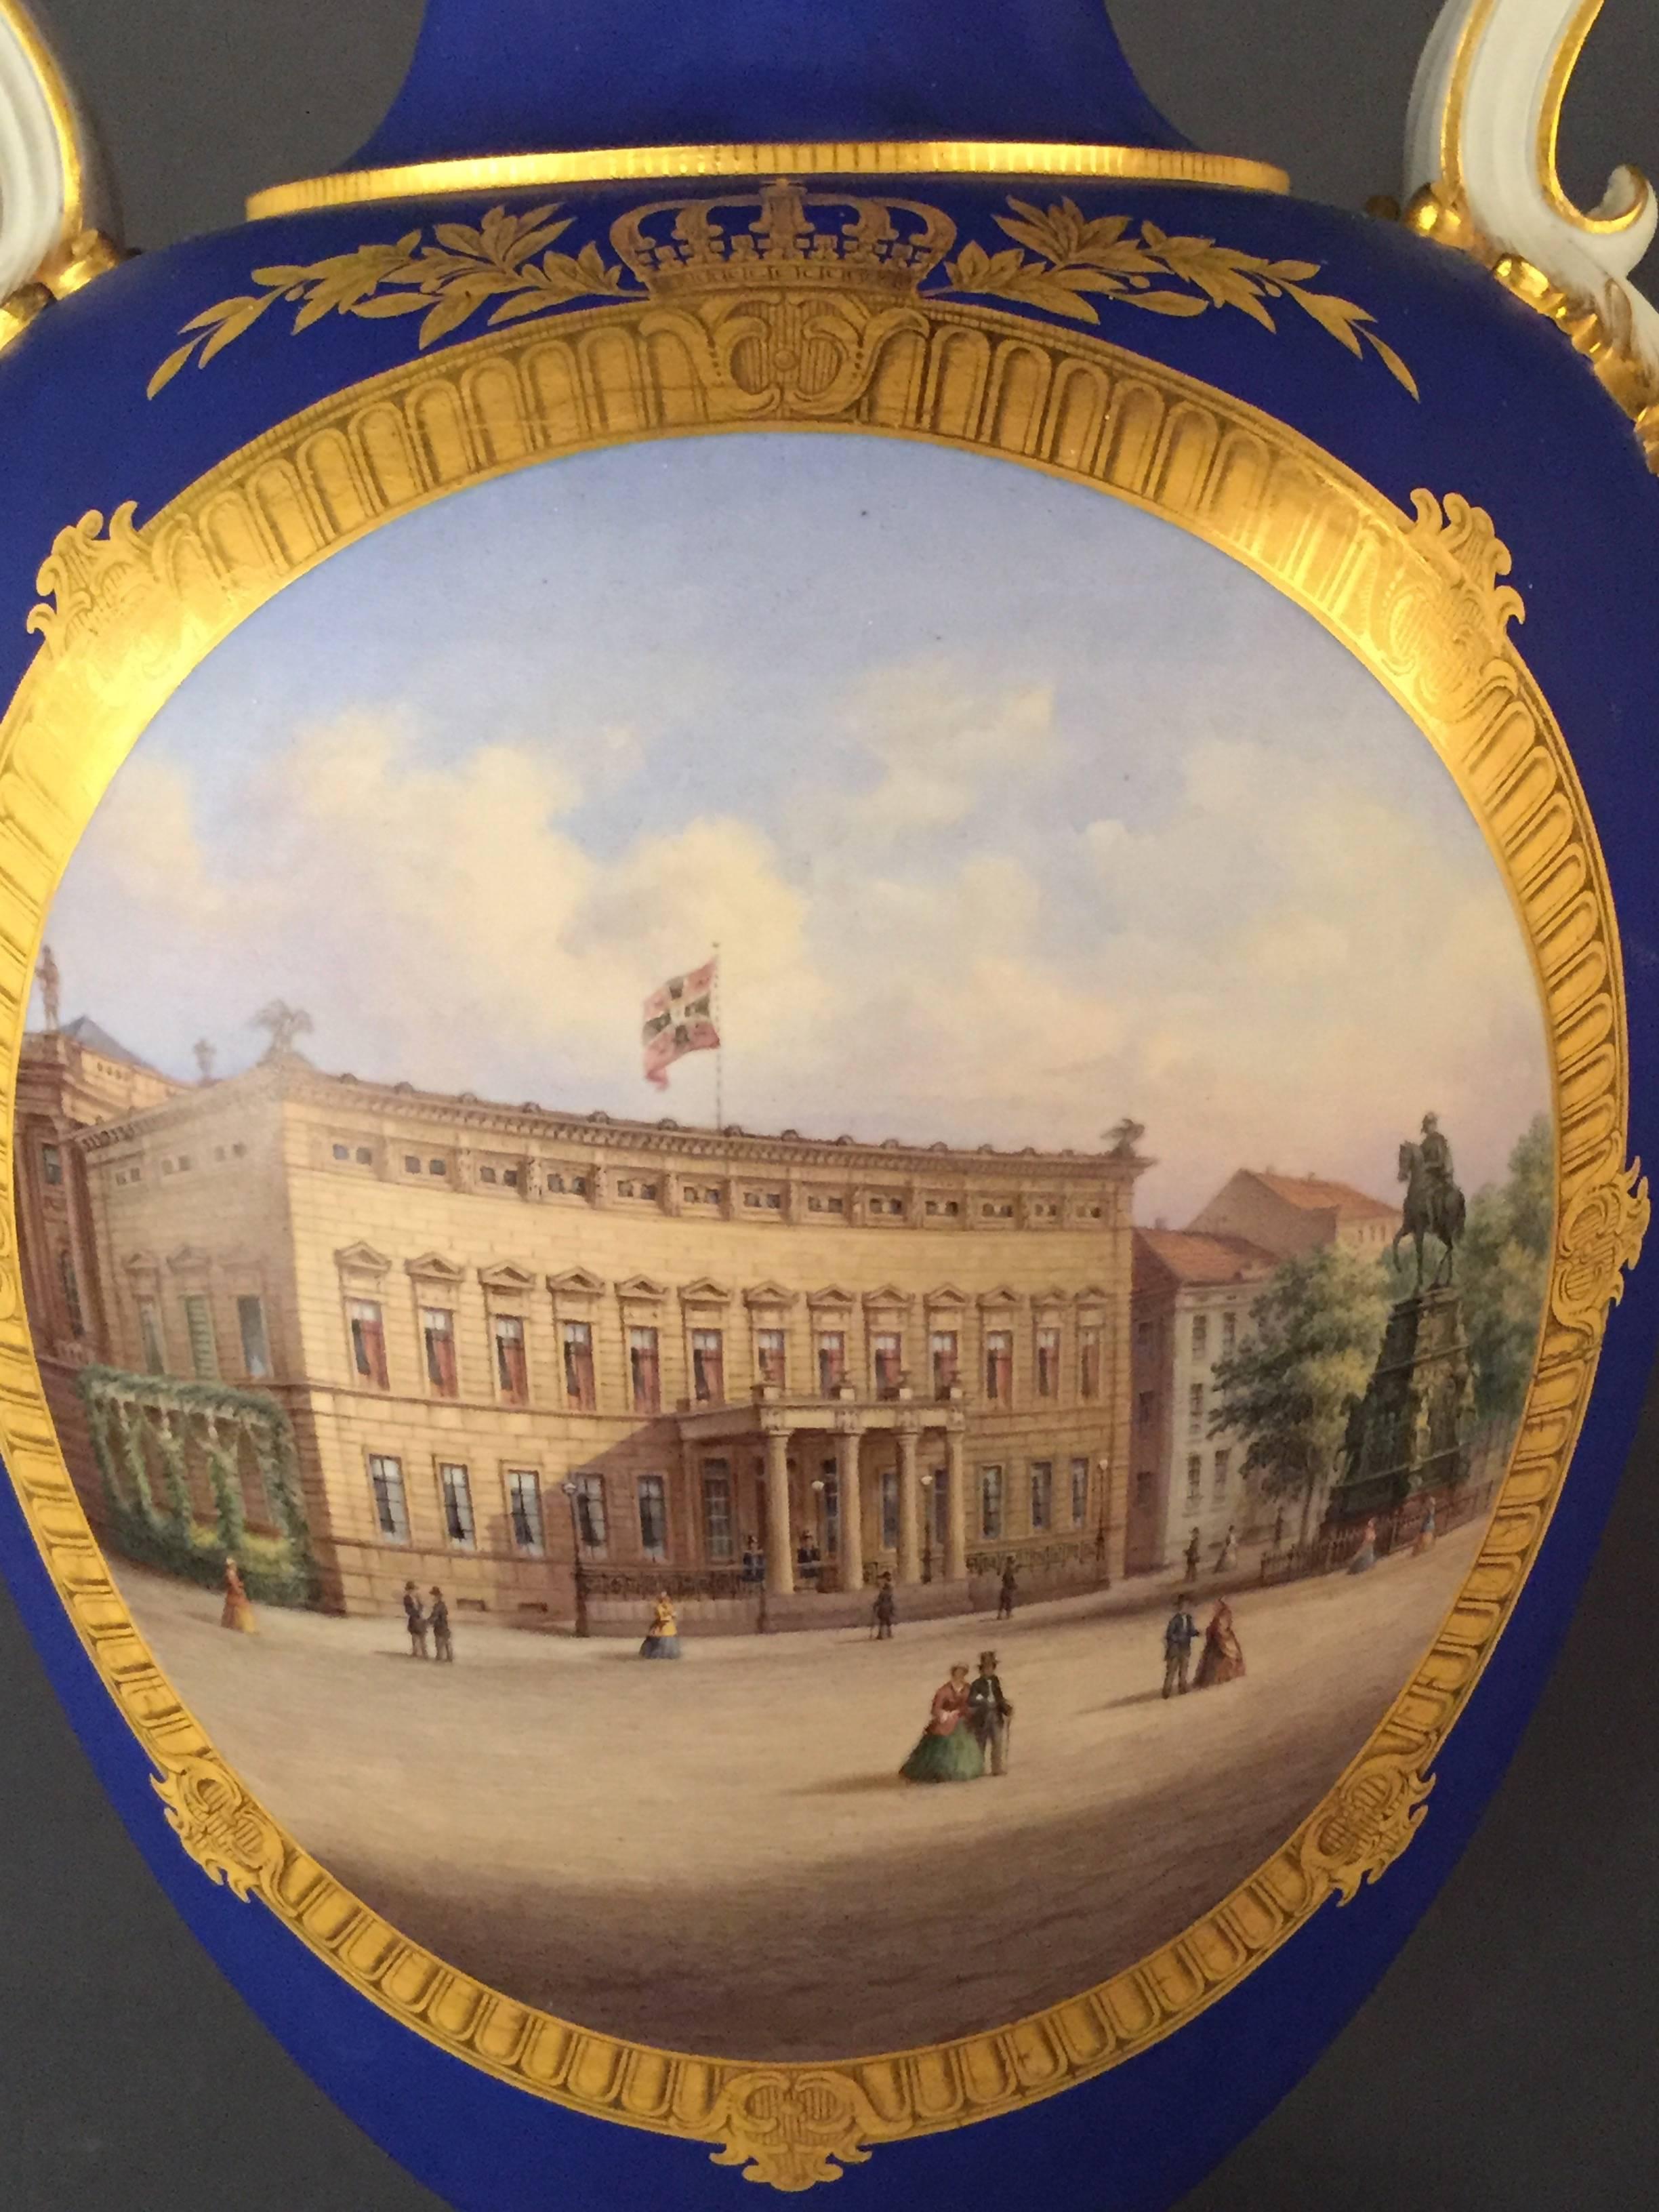 Biscuit porcelain matte blue background. Round picture frame in a crowned gold-framed frame, color-painted view of the Crown Prince's Palace with a statue of Frederick the Great and strollers.
Etched gold contours and gold-rimmed handles.
A spiral